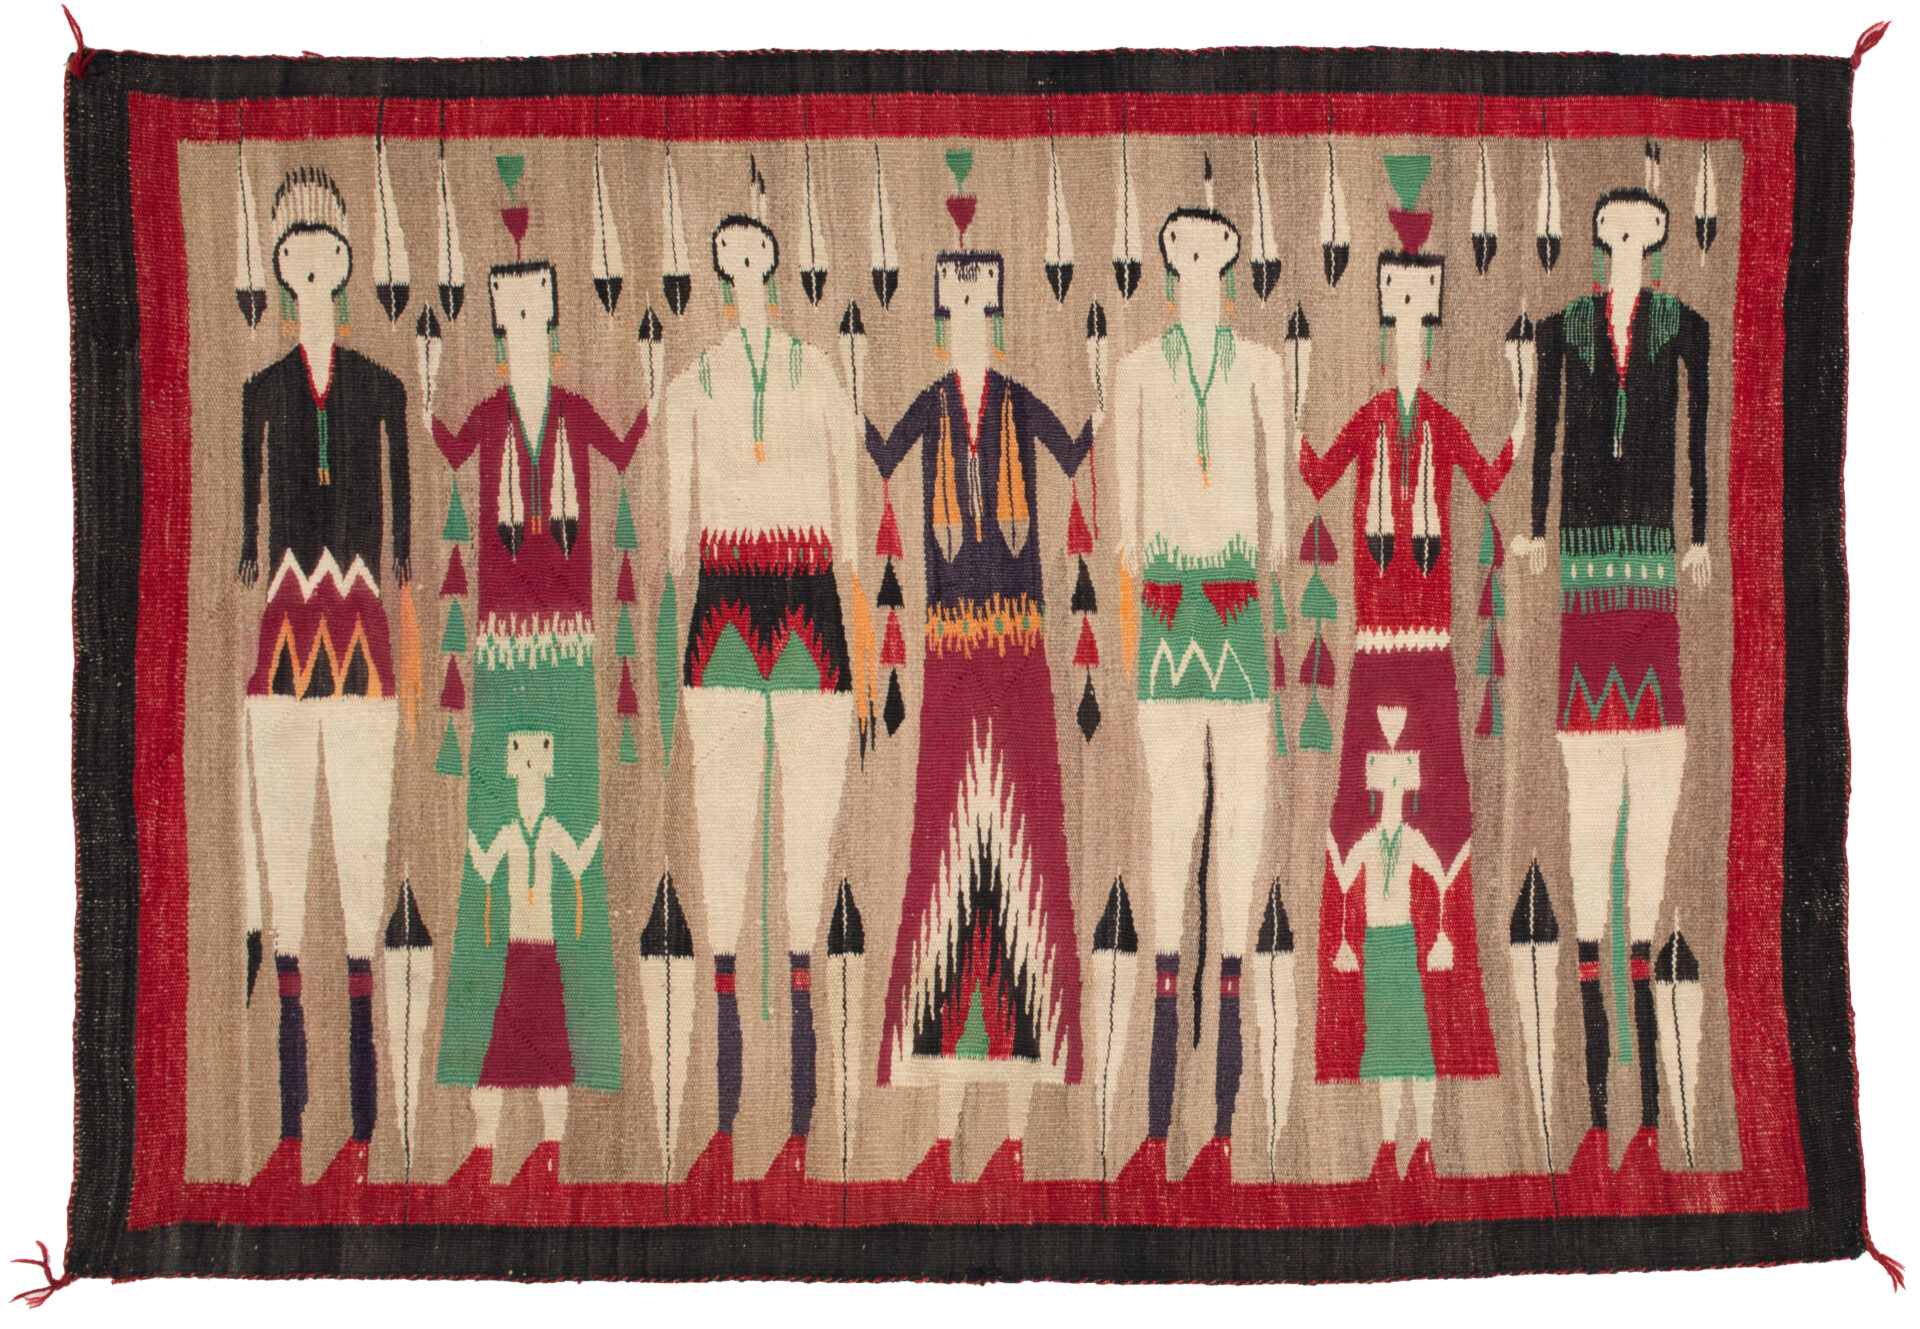 A textile with a group of Native people on it.